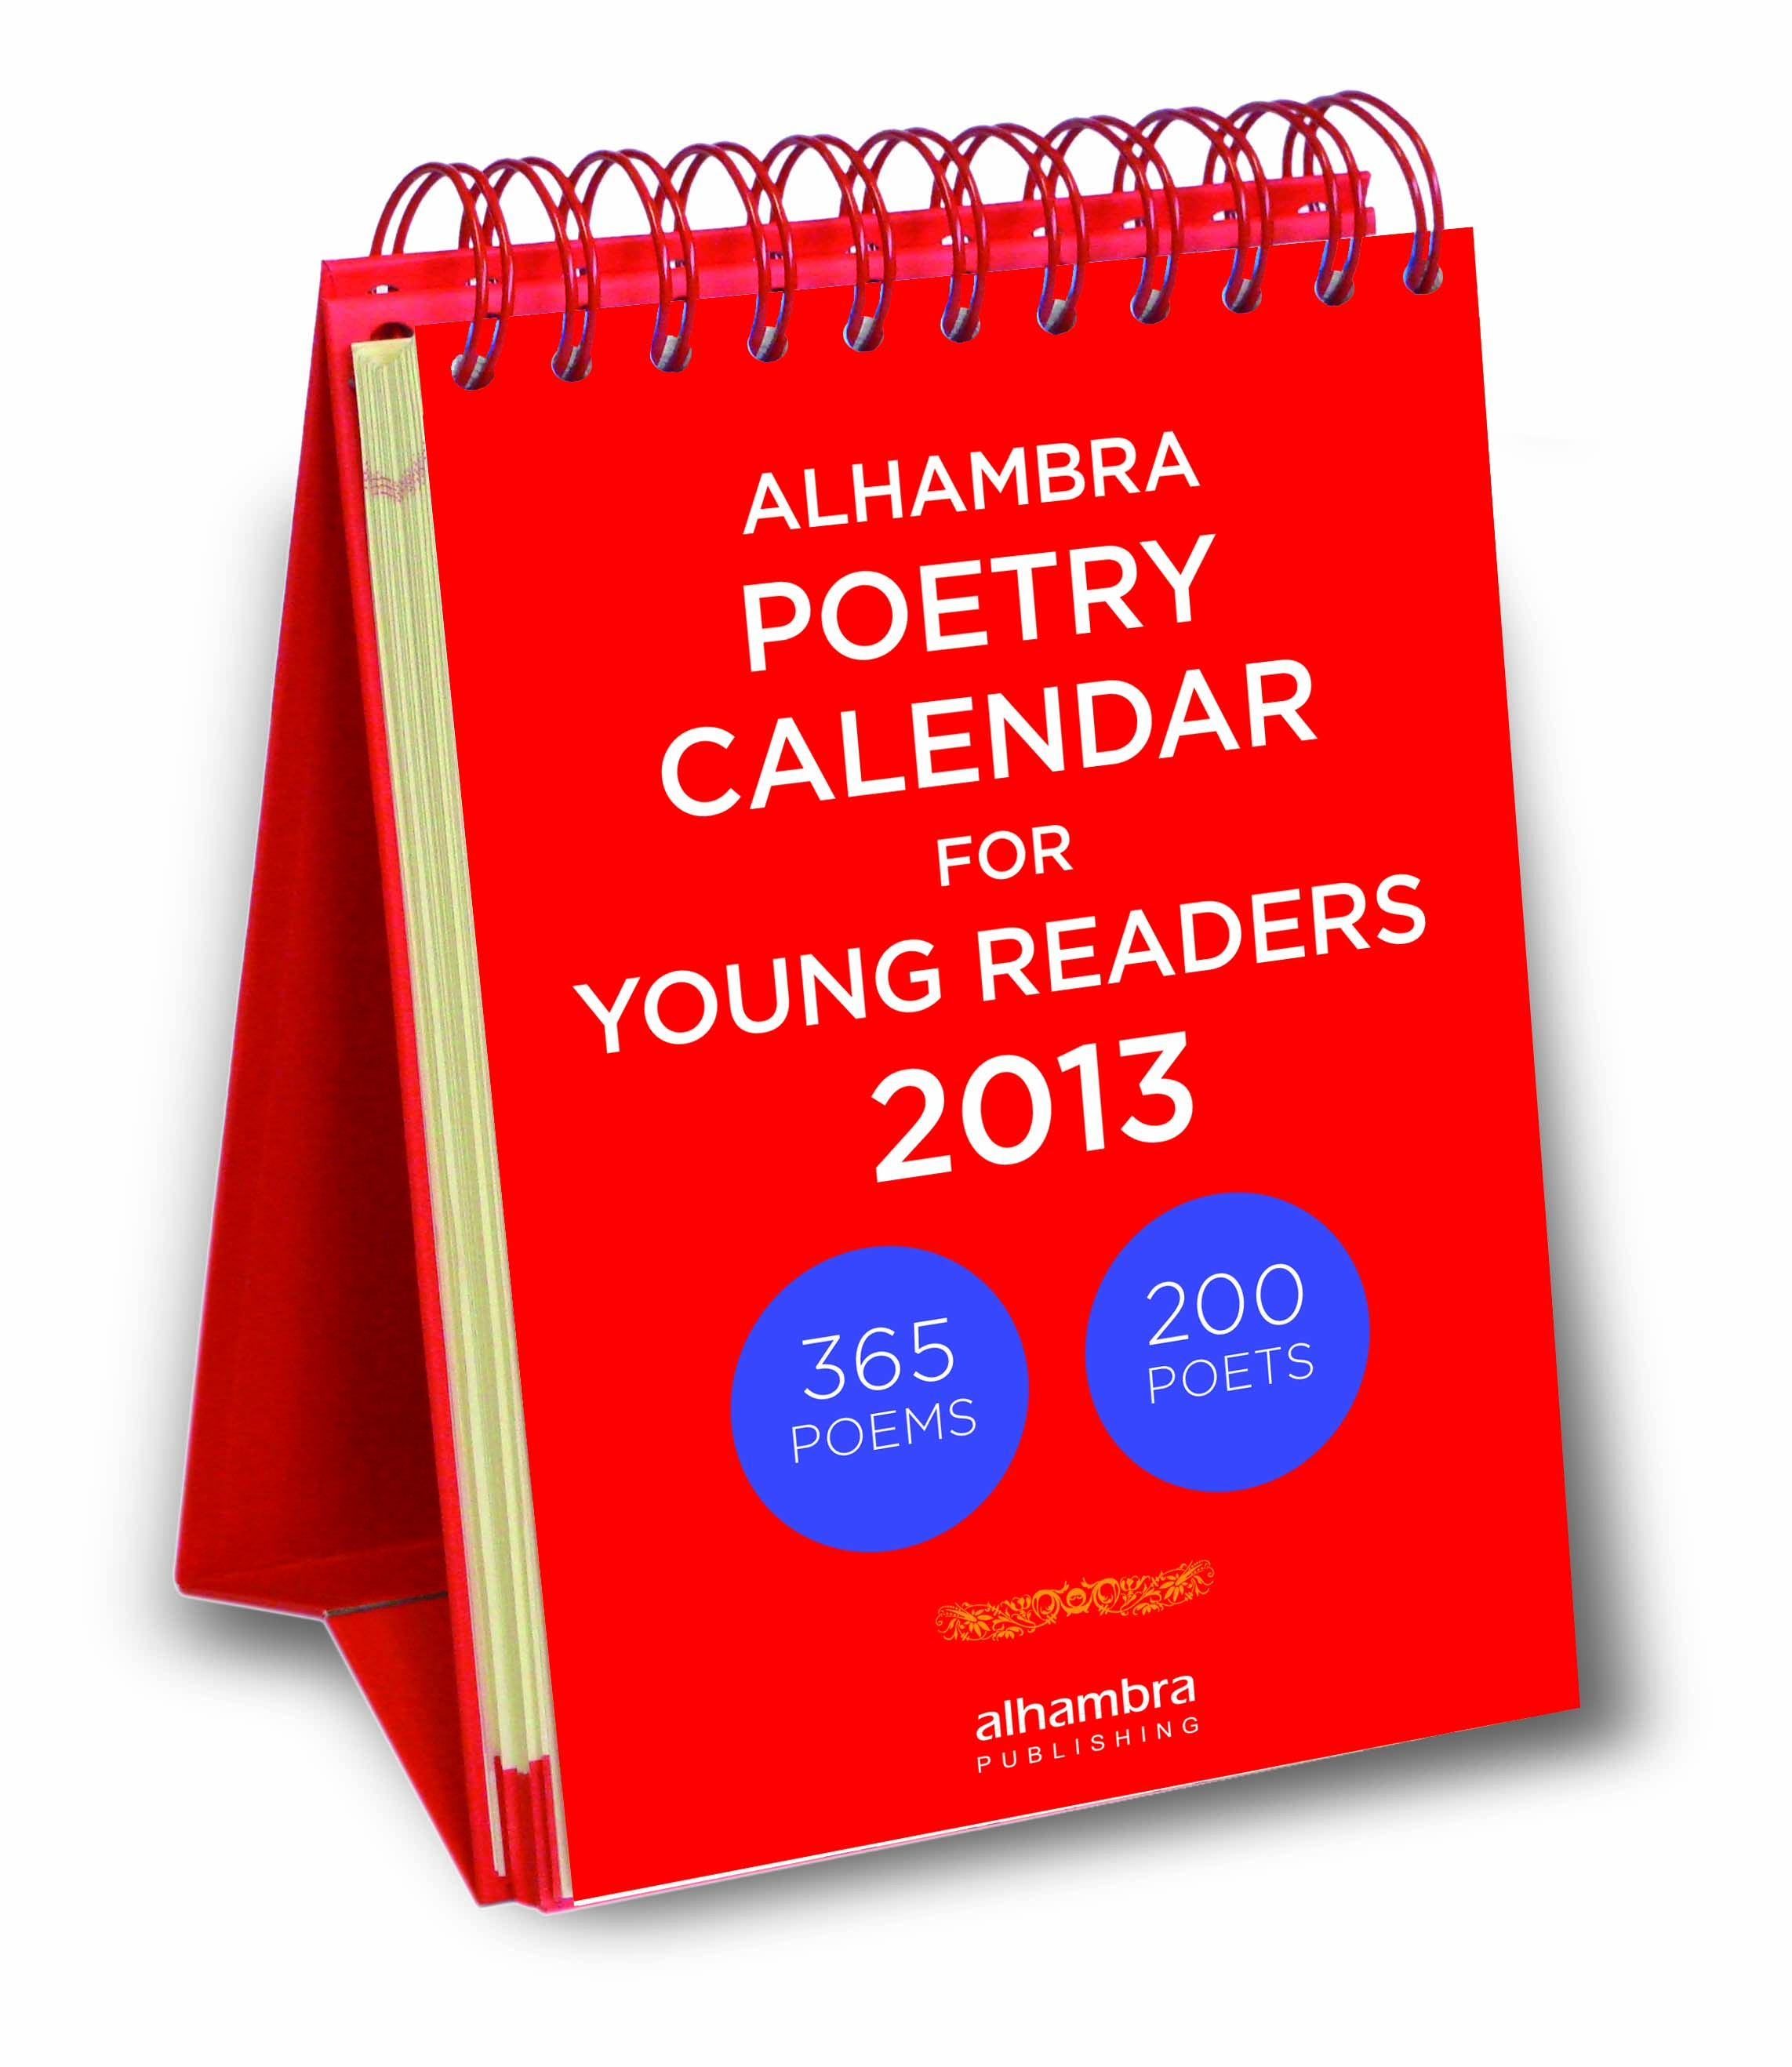 Alhambra Poetry Calendar 2013 for young Readers